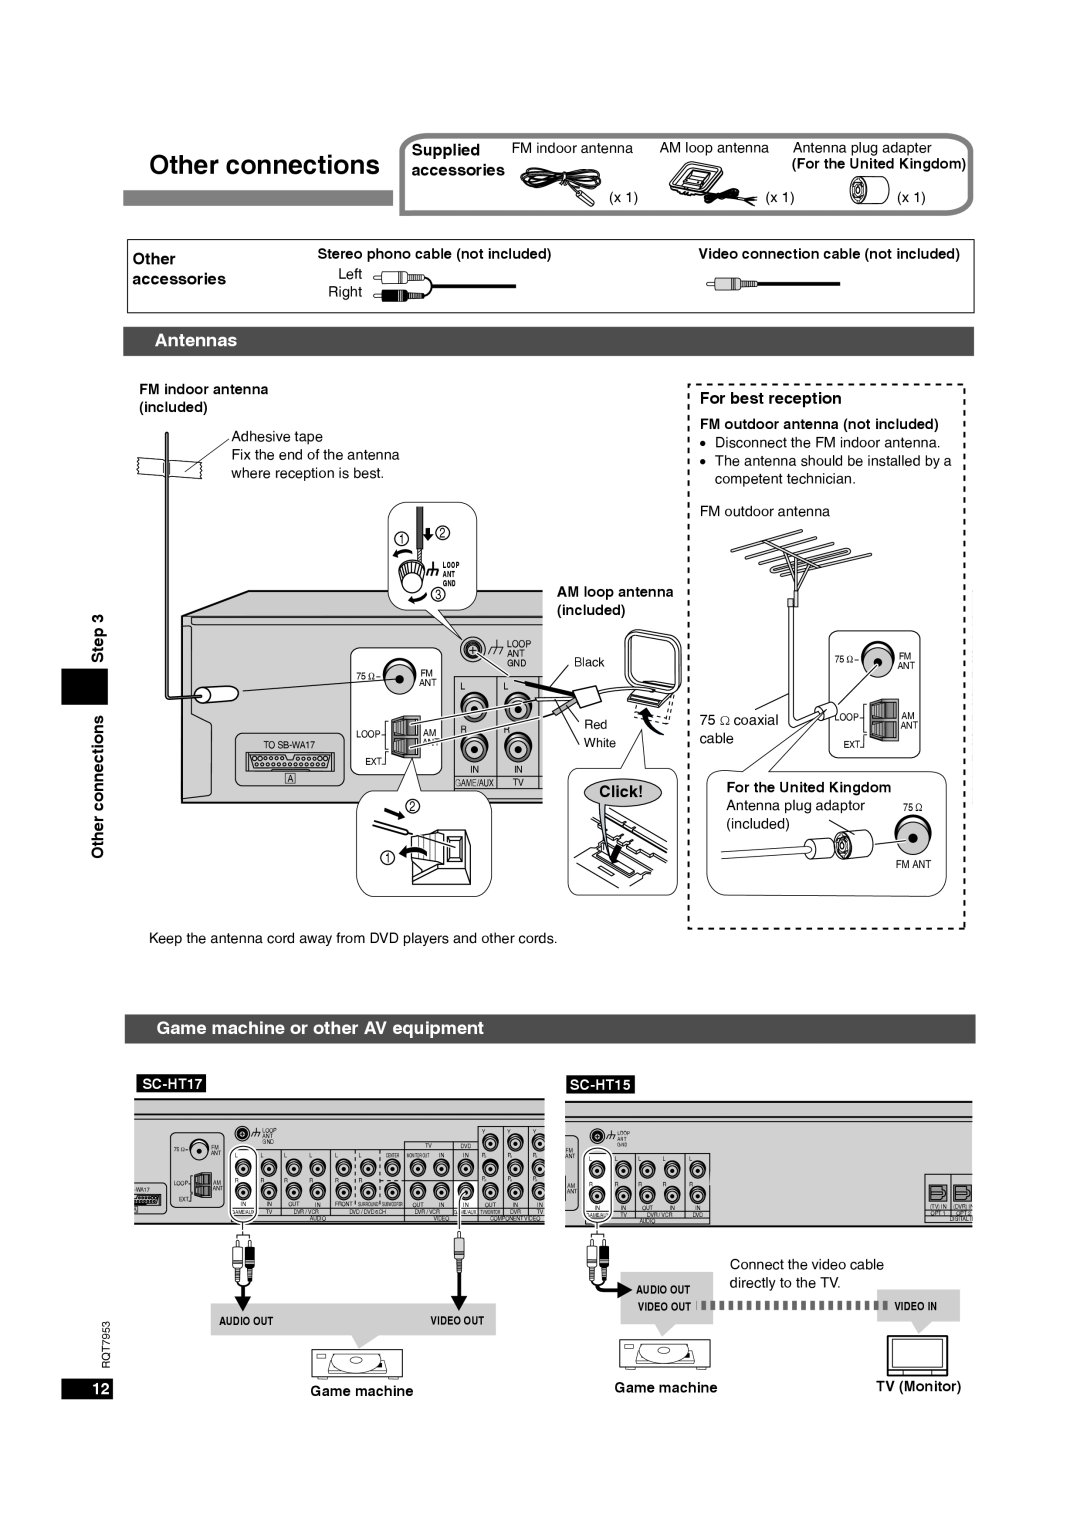 Panasonic SC-HT17 operating instructions Other connections, Antennas, Game machine or other AV equipment, SC-HT15 